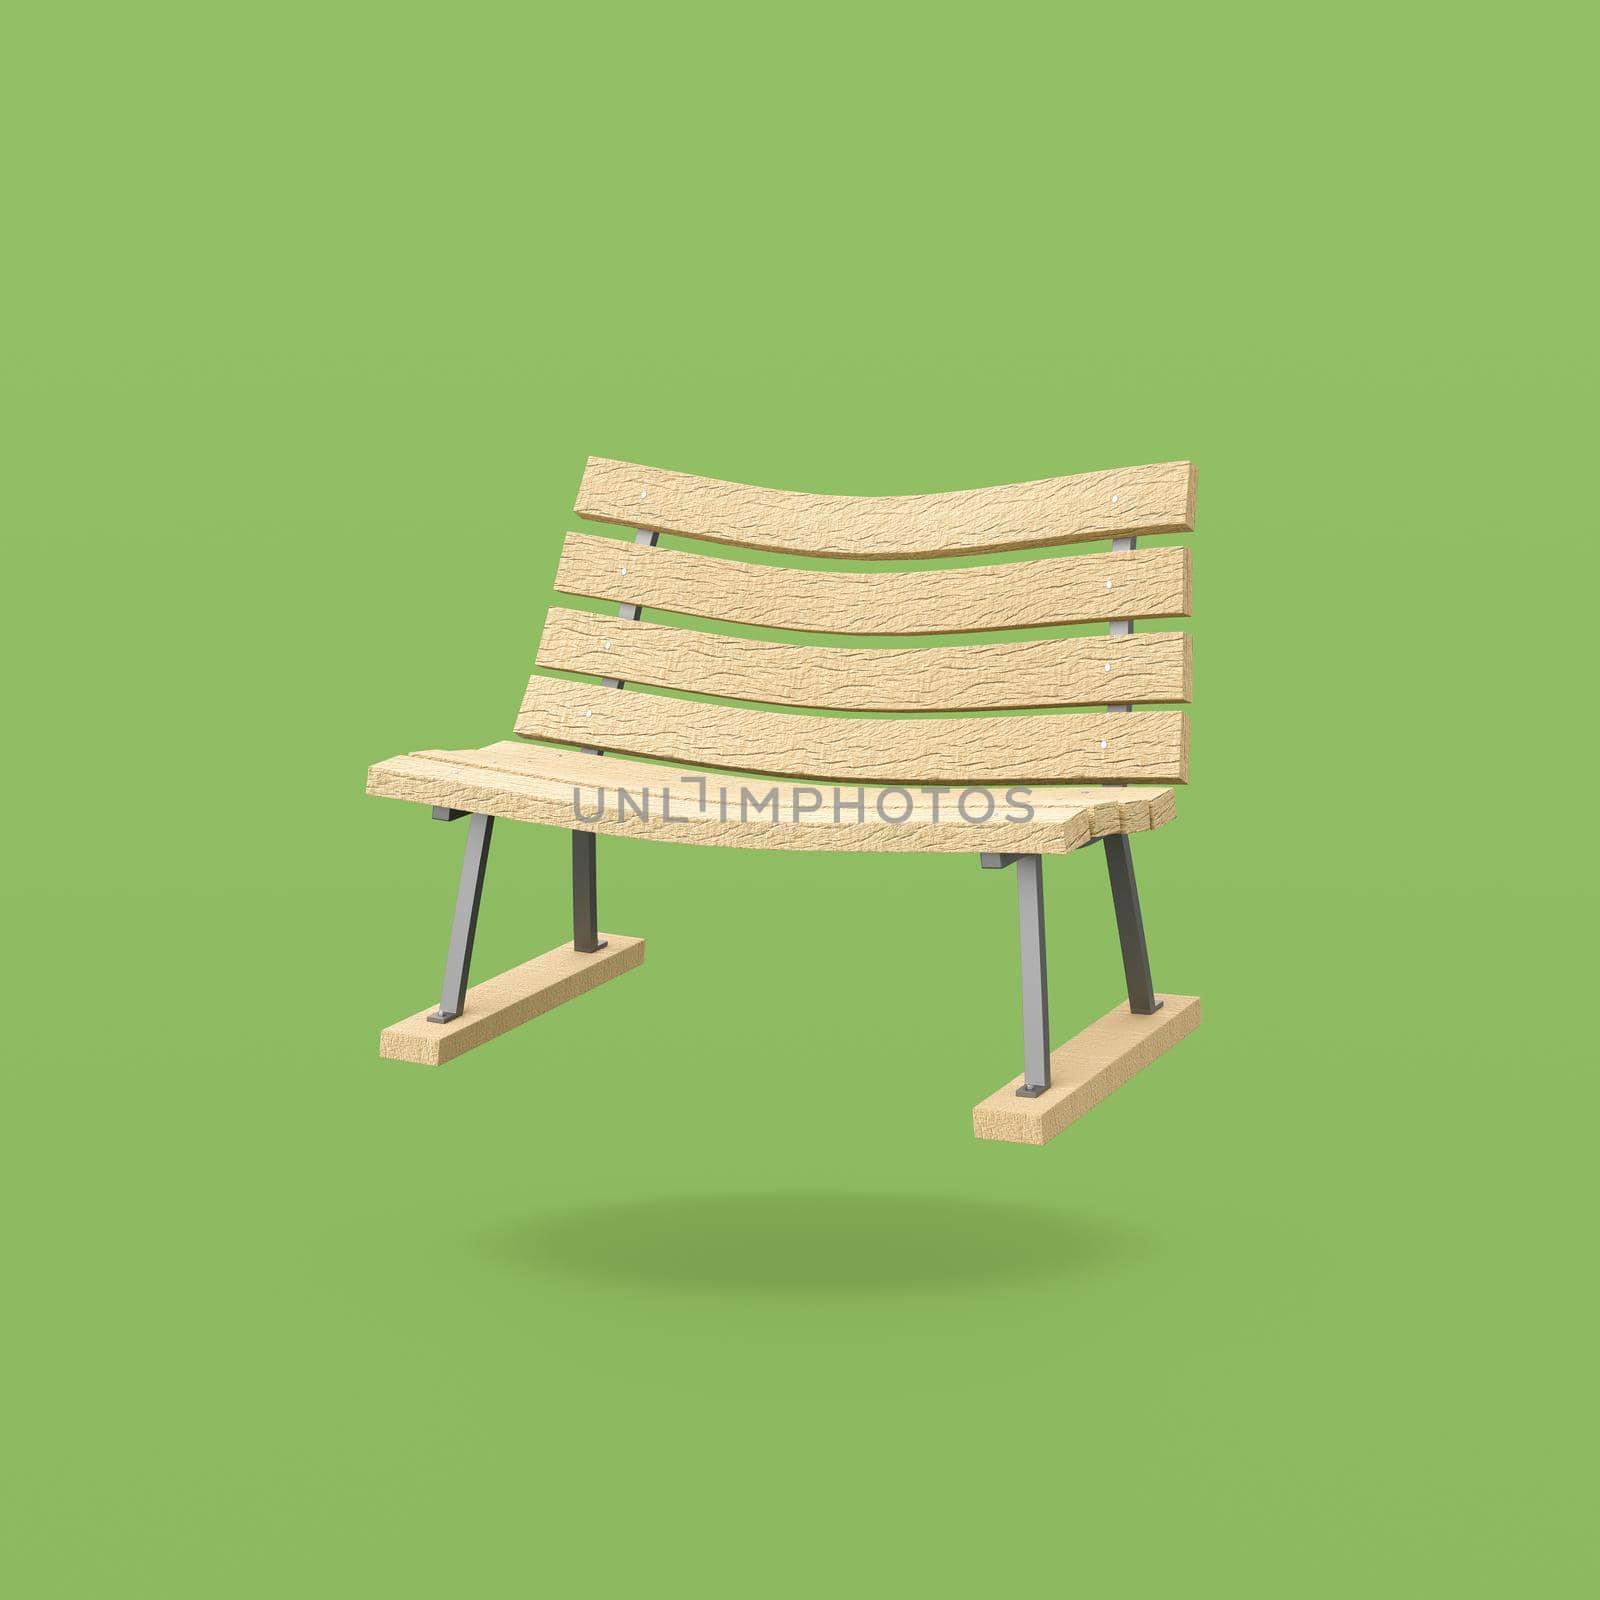 Funny Wooden Bench on Flat Green Background with Shadow 3D Illustration